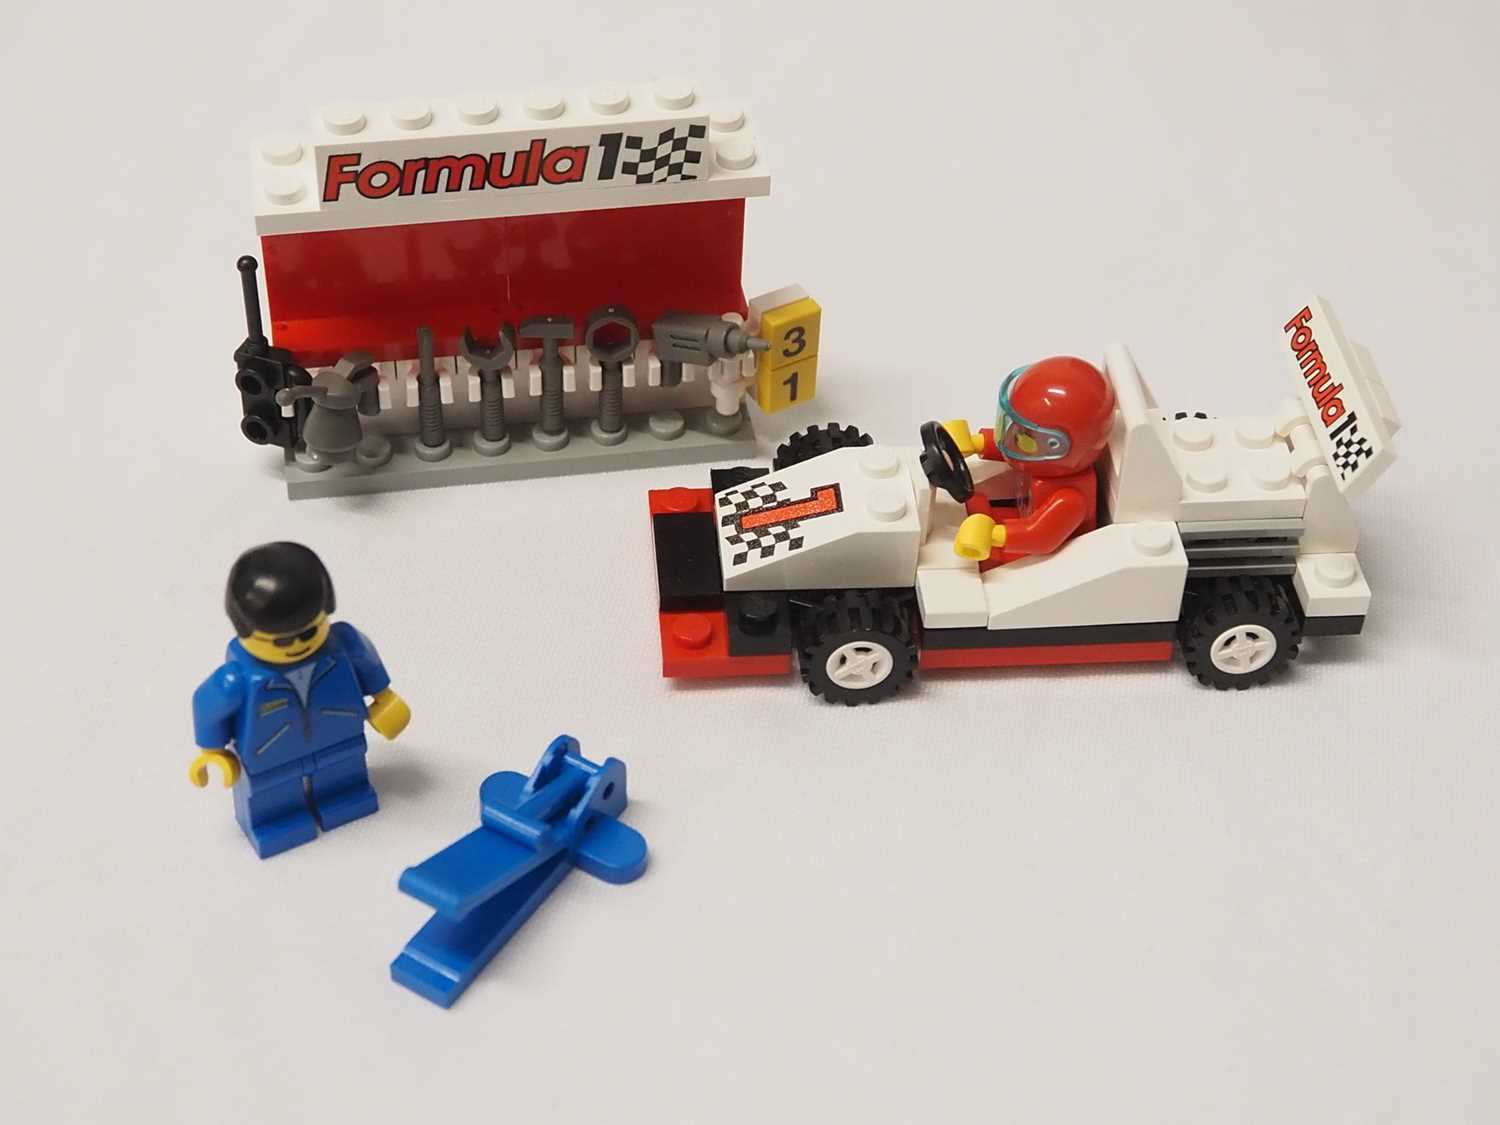 LEGO - CLASSIC TOWN #6484 F1 Hauler - 9V Electric System, appears complete with instructions, - Image 2 of 5